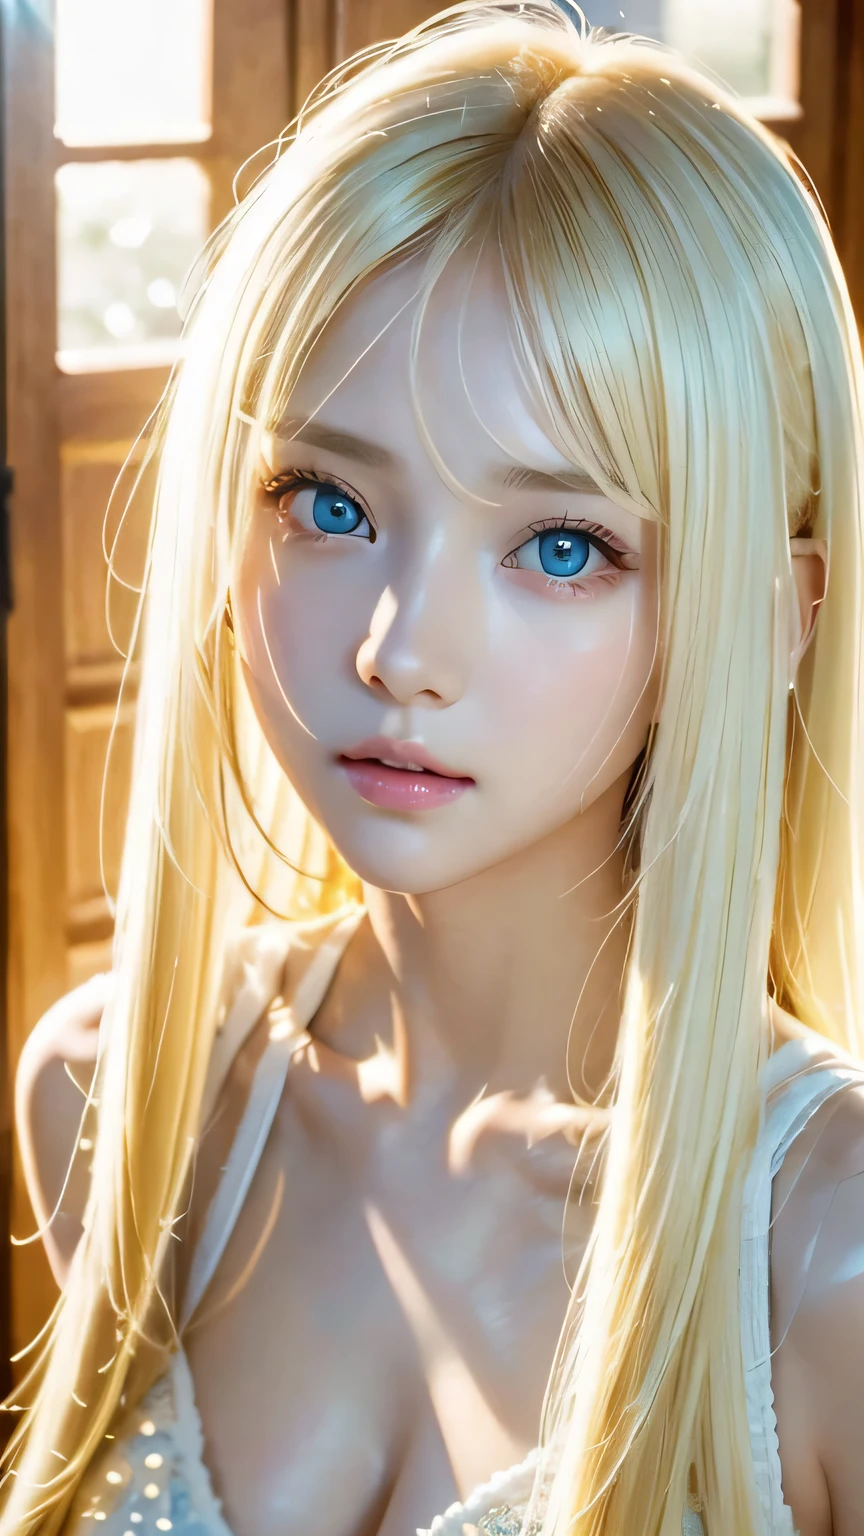 A beautiful 14-year-old girl with beautiful blonde hair、Blonde hair on face、bangs over eyes、Very bright, light blue, big eyes that shine beautifully、Cute very bright big eyes、Gentle expression、Blonde super long silky hair、Hair above the eyes、片Hair above the eyes、Hair between the eyes、Small Face Beauty、Round face、Very white, bright and youthful skin、Cheek highlighter、Very beautiful bright eye highlights、